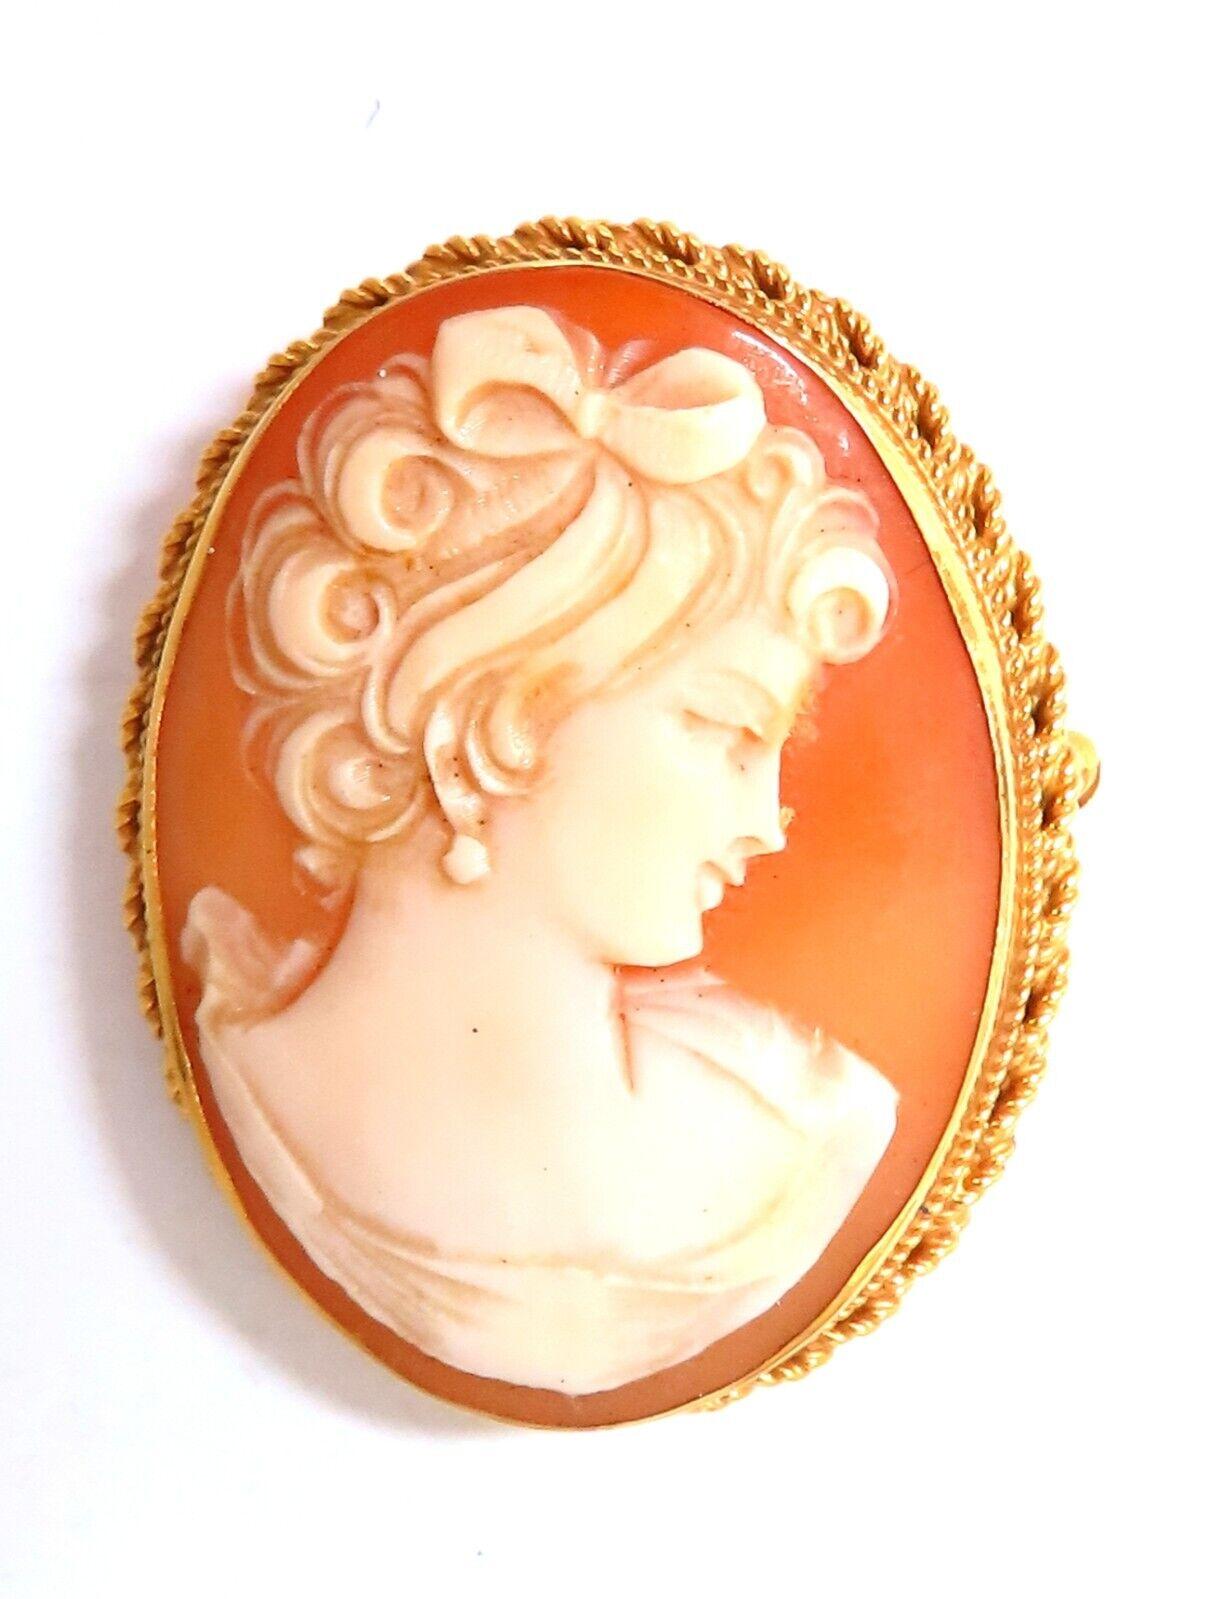 Vintage Cameo Pin Very Well Made 36 x 31mm inch 14kt. yellow gold 7.8 Grams.

